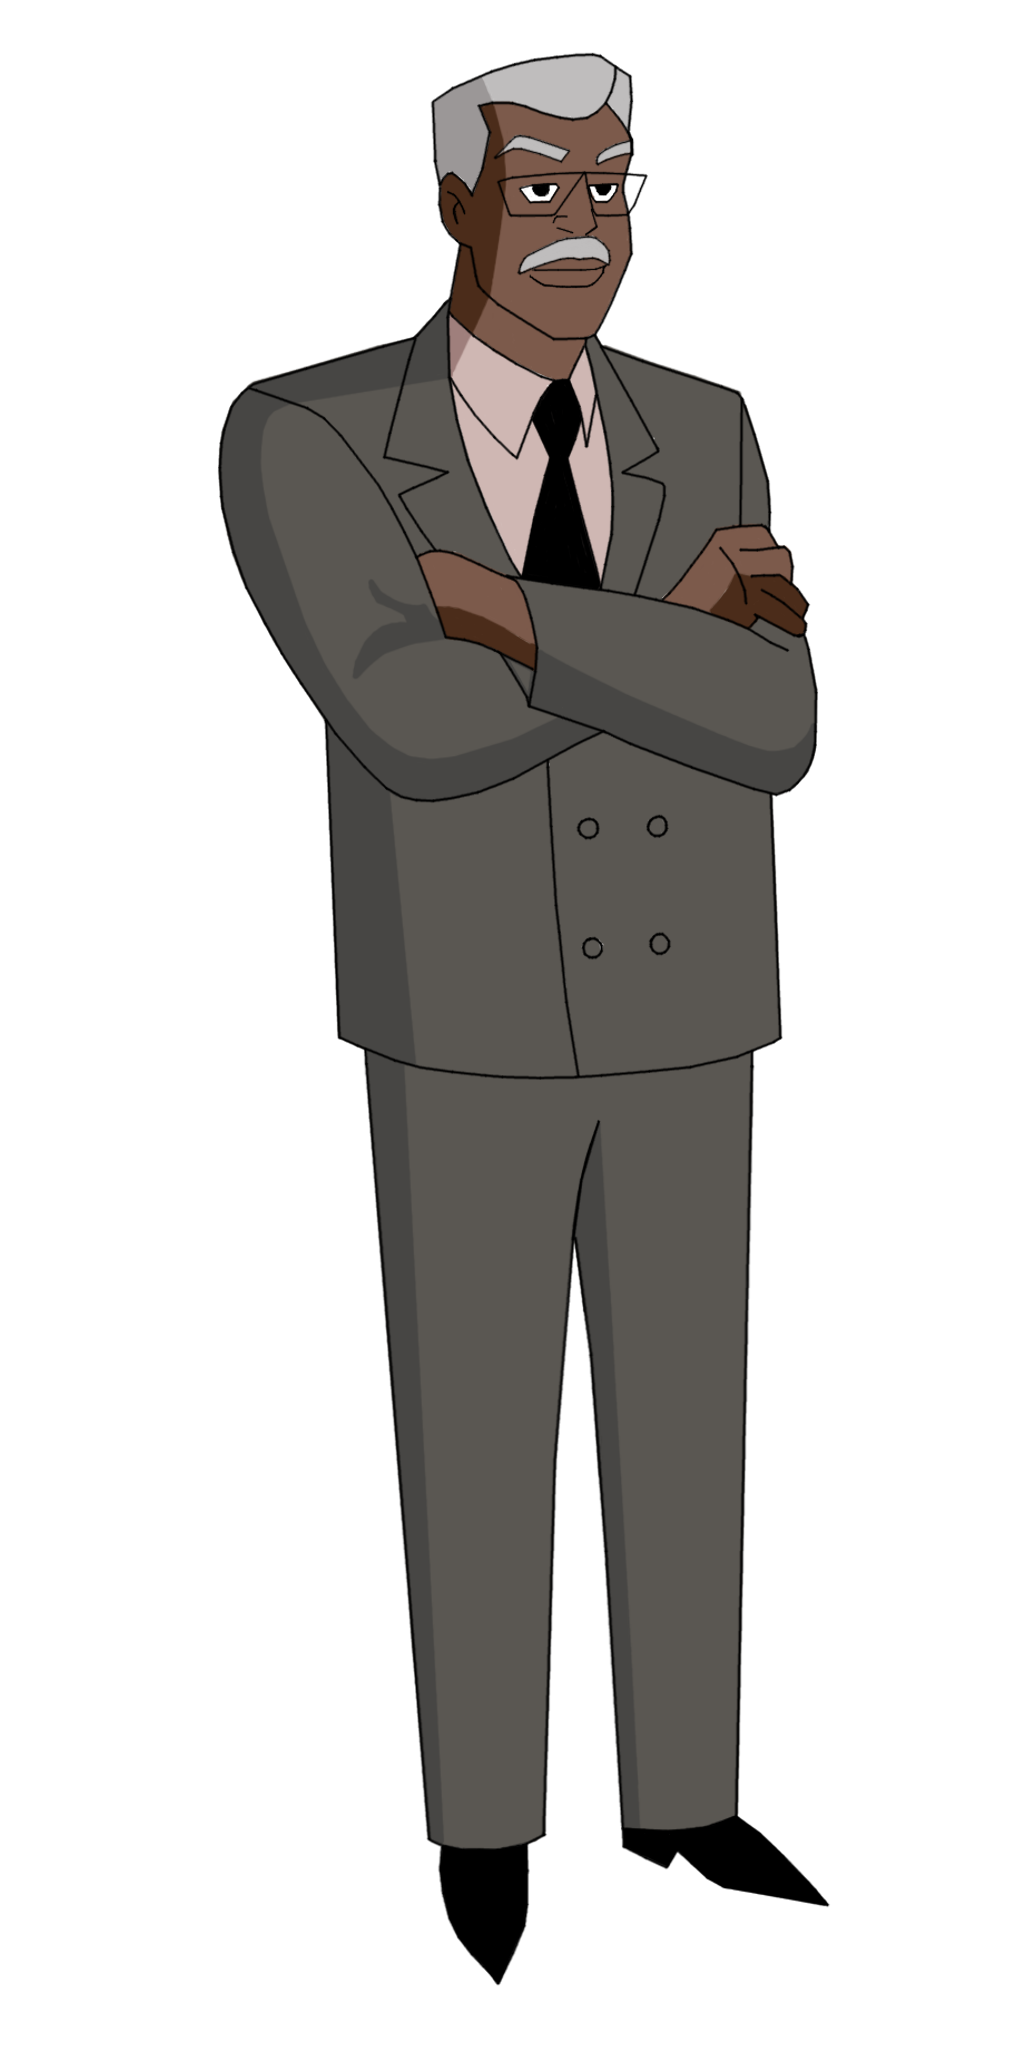 Batman TAS: Lucius Fox by TheRealFB1 by TheRealFB1 on DeviantArt